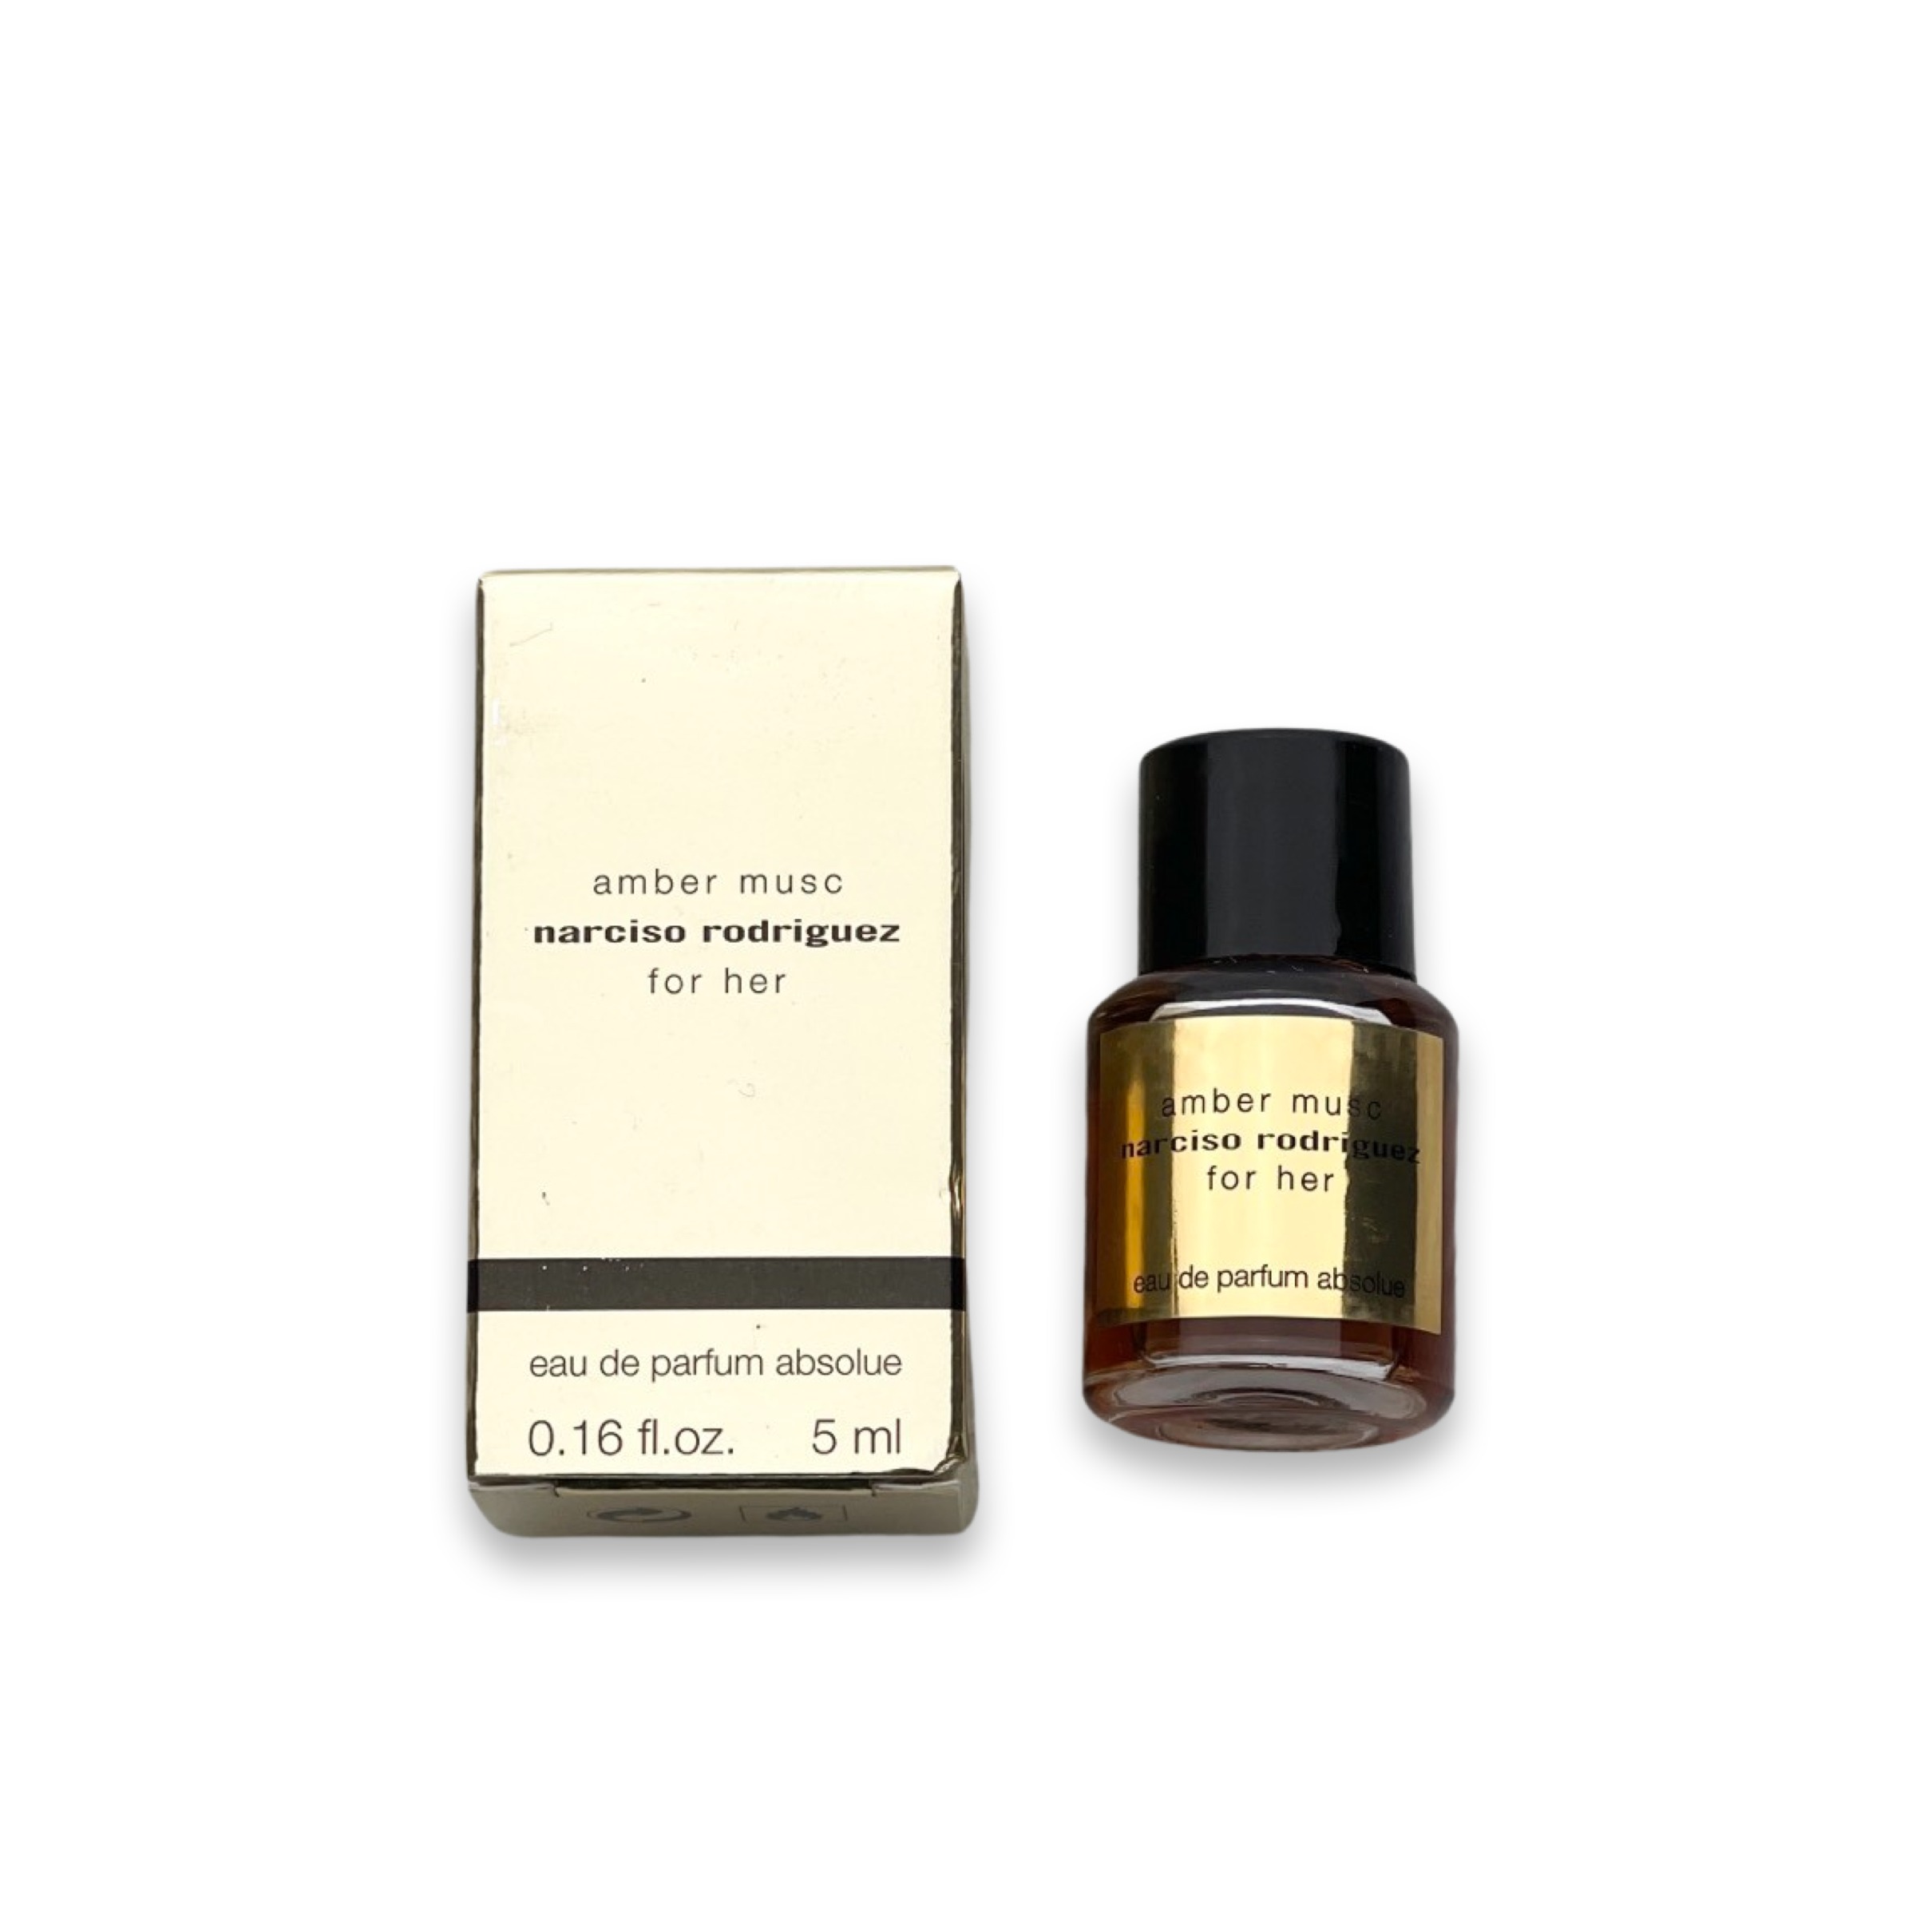 Narciso Rodriguez Amber Musc for her EDP / Travel Size (5ml)